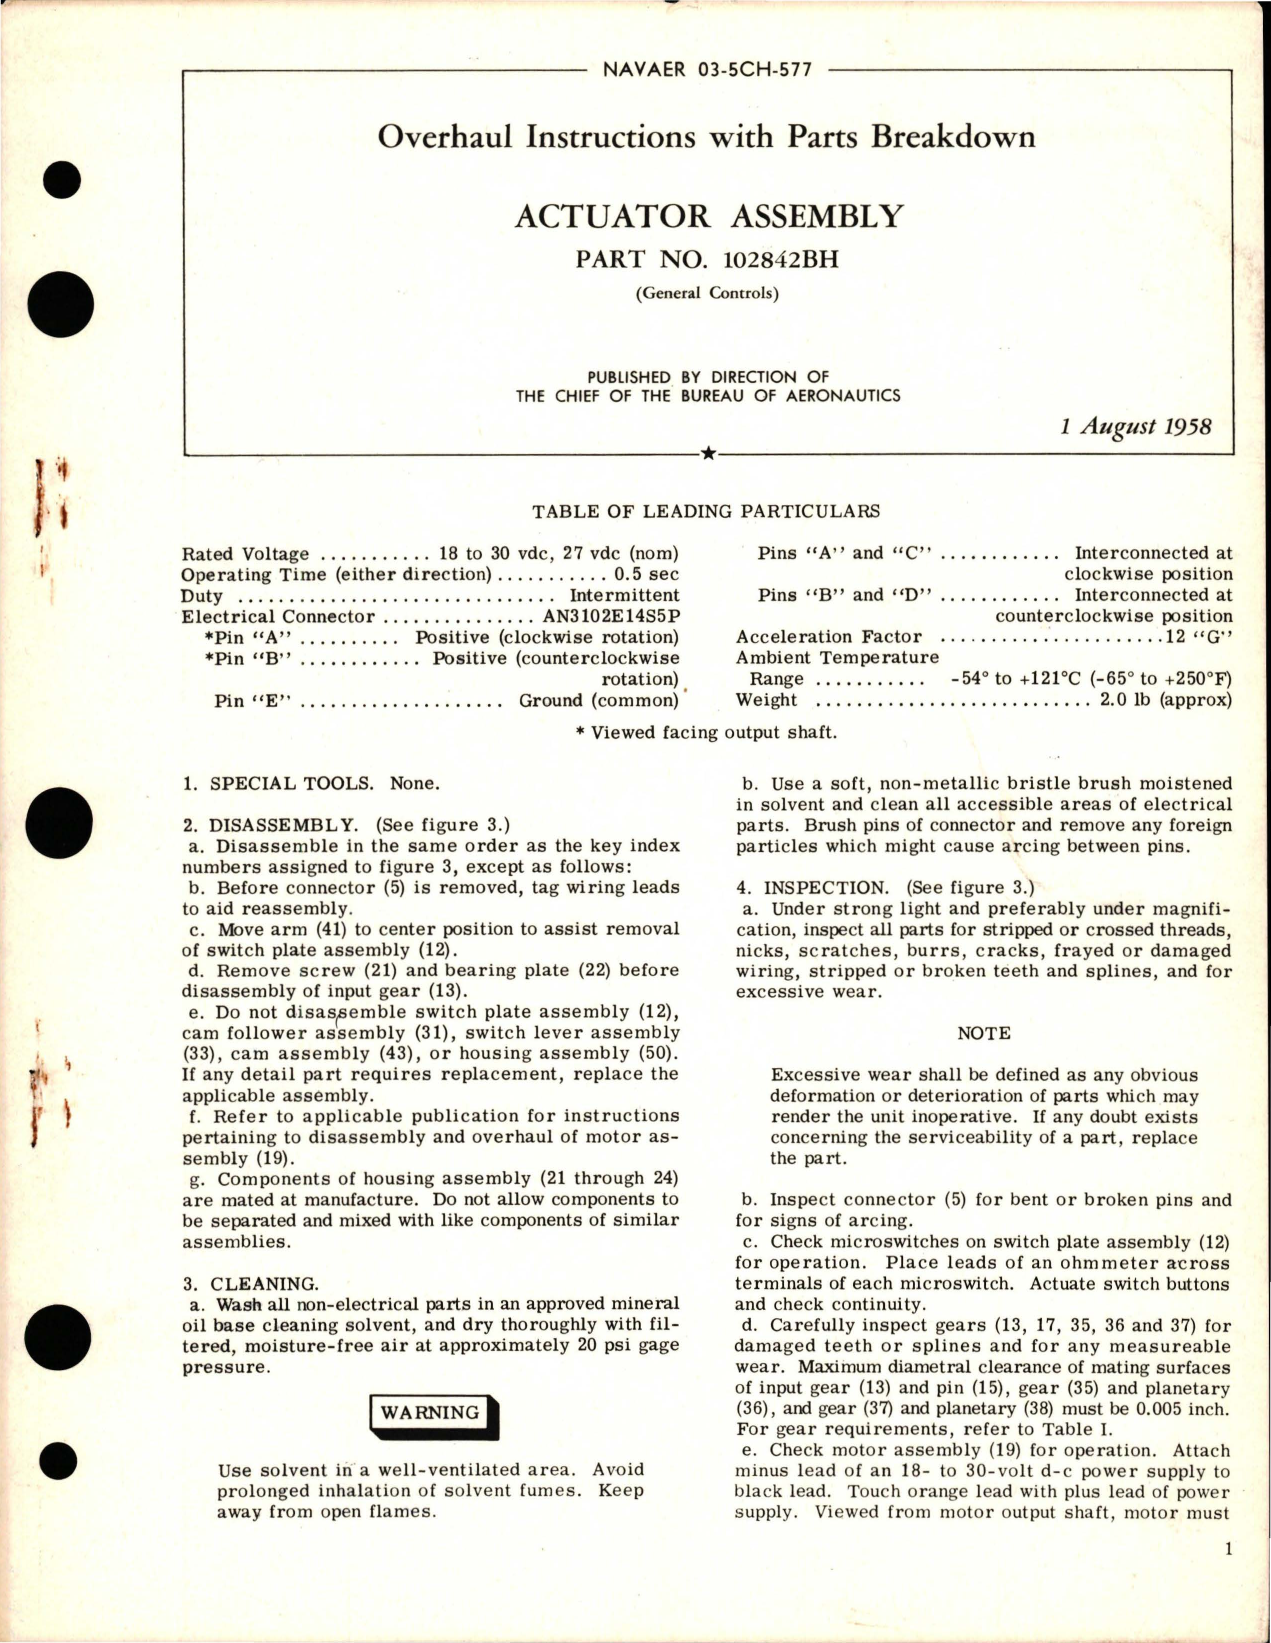 Sample page 1 from AirCorps Library document: Overhaul Instructions with Parts Breakdown for Actuator Assembly - Part 102842BH